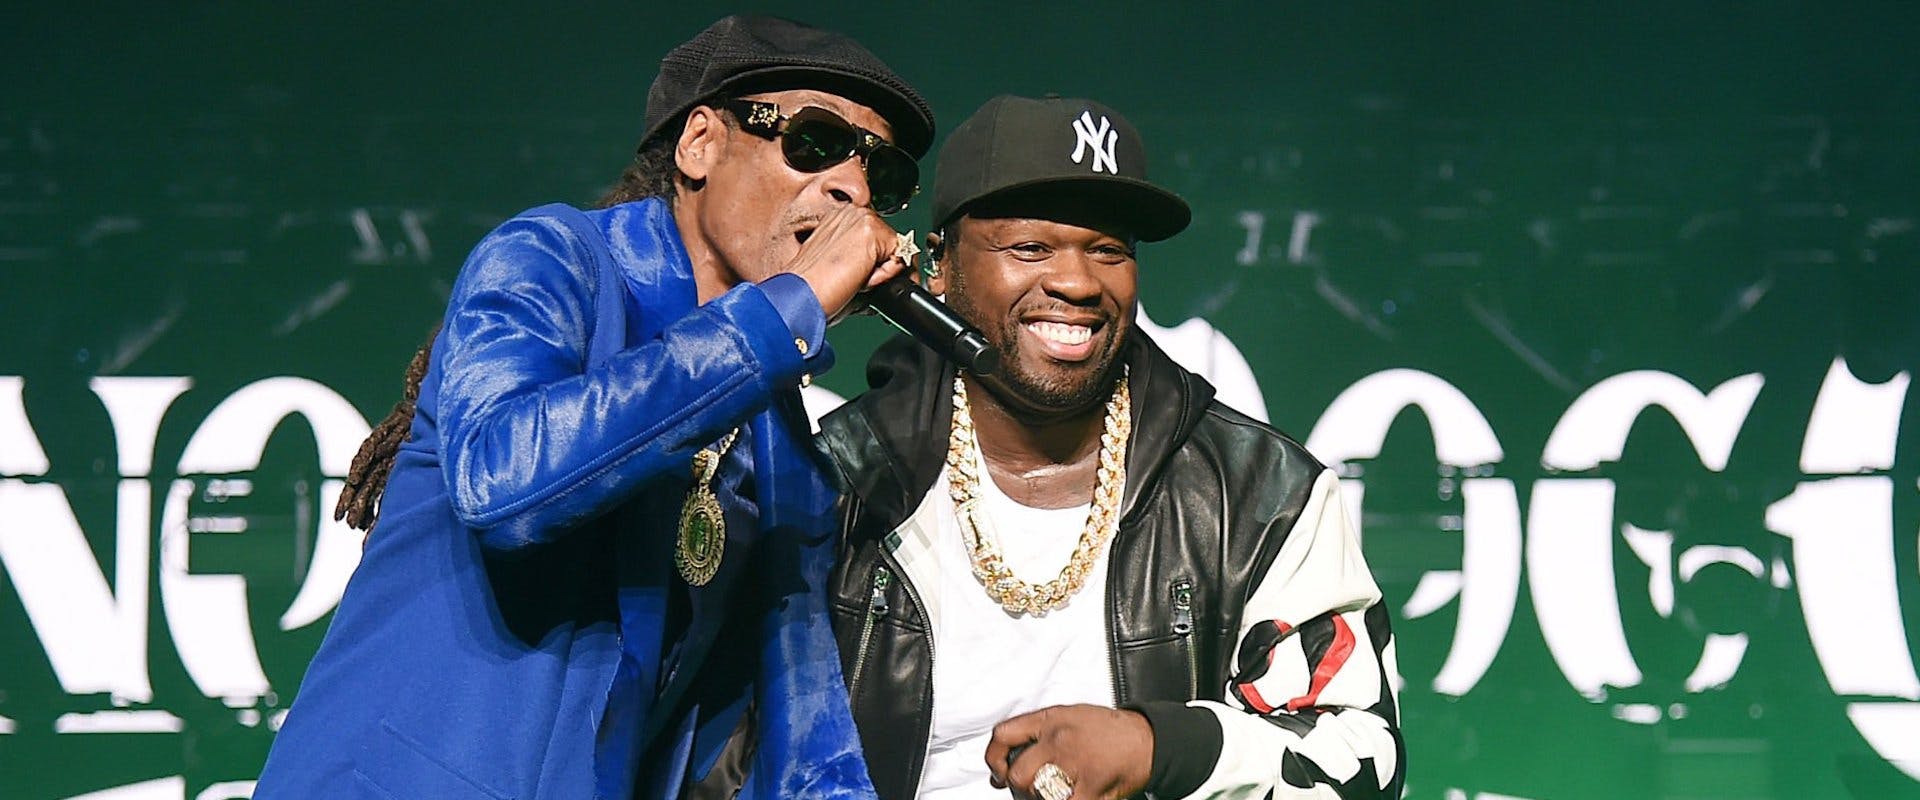 Snoop Dogg (L) and Curtis "50 Cent" Jackson perform onstage at STARZ Madison Square Garden "Power" Season 6 Red Carpet Premiere, Concert, and Party on August 20, 2019 in New York City. (Photo by Jamie McCarthy/Getty Images for STARZ)